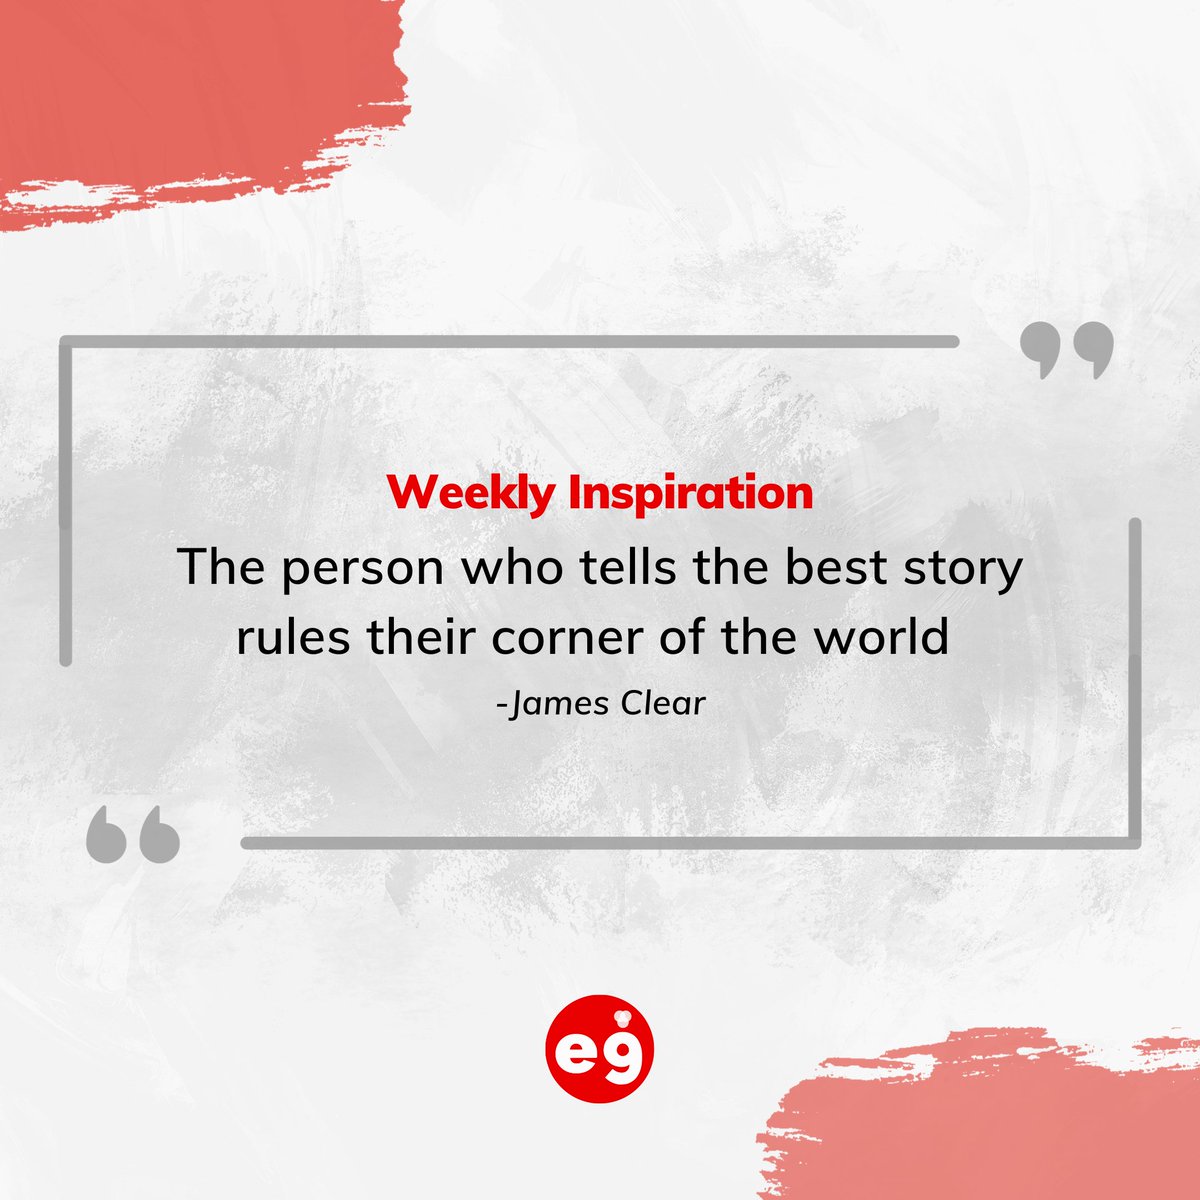 Weekly Inspiration✨

'The person who tells the best story rules their corner of the world' - James Clear

#e9 #weeklyinspiration #inspiration #jamesclear